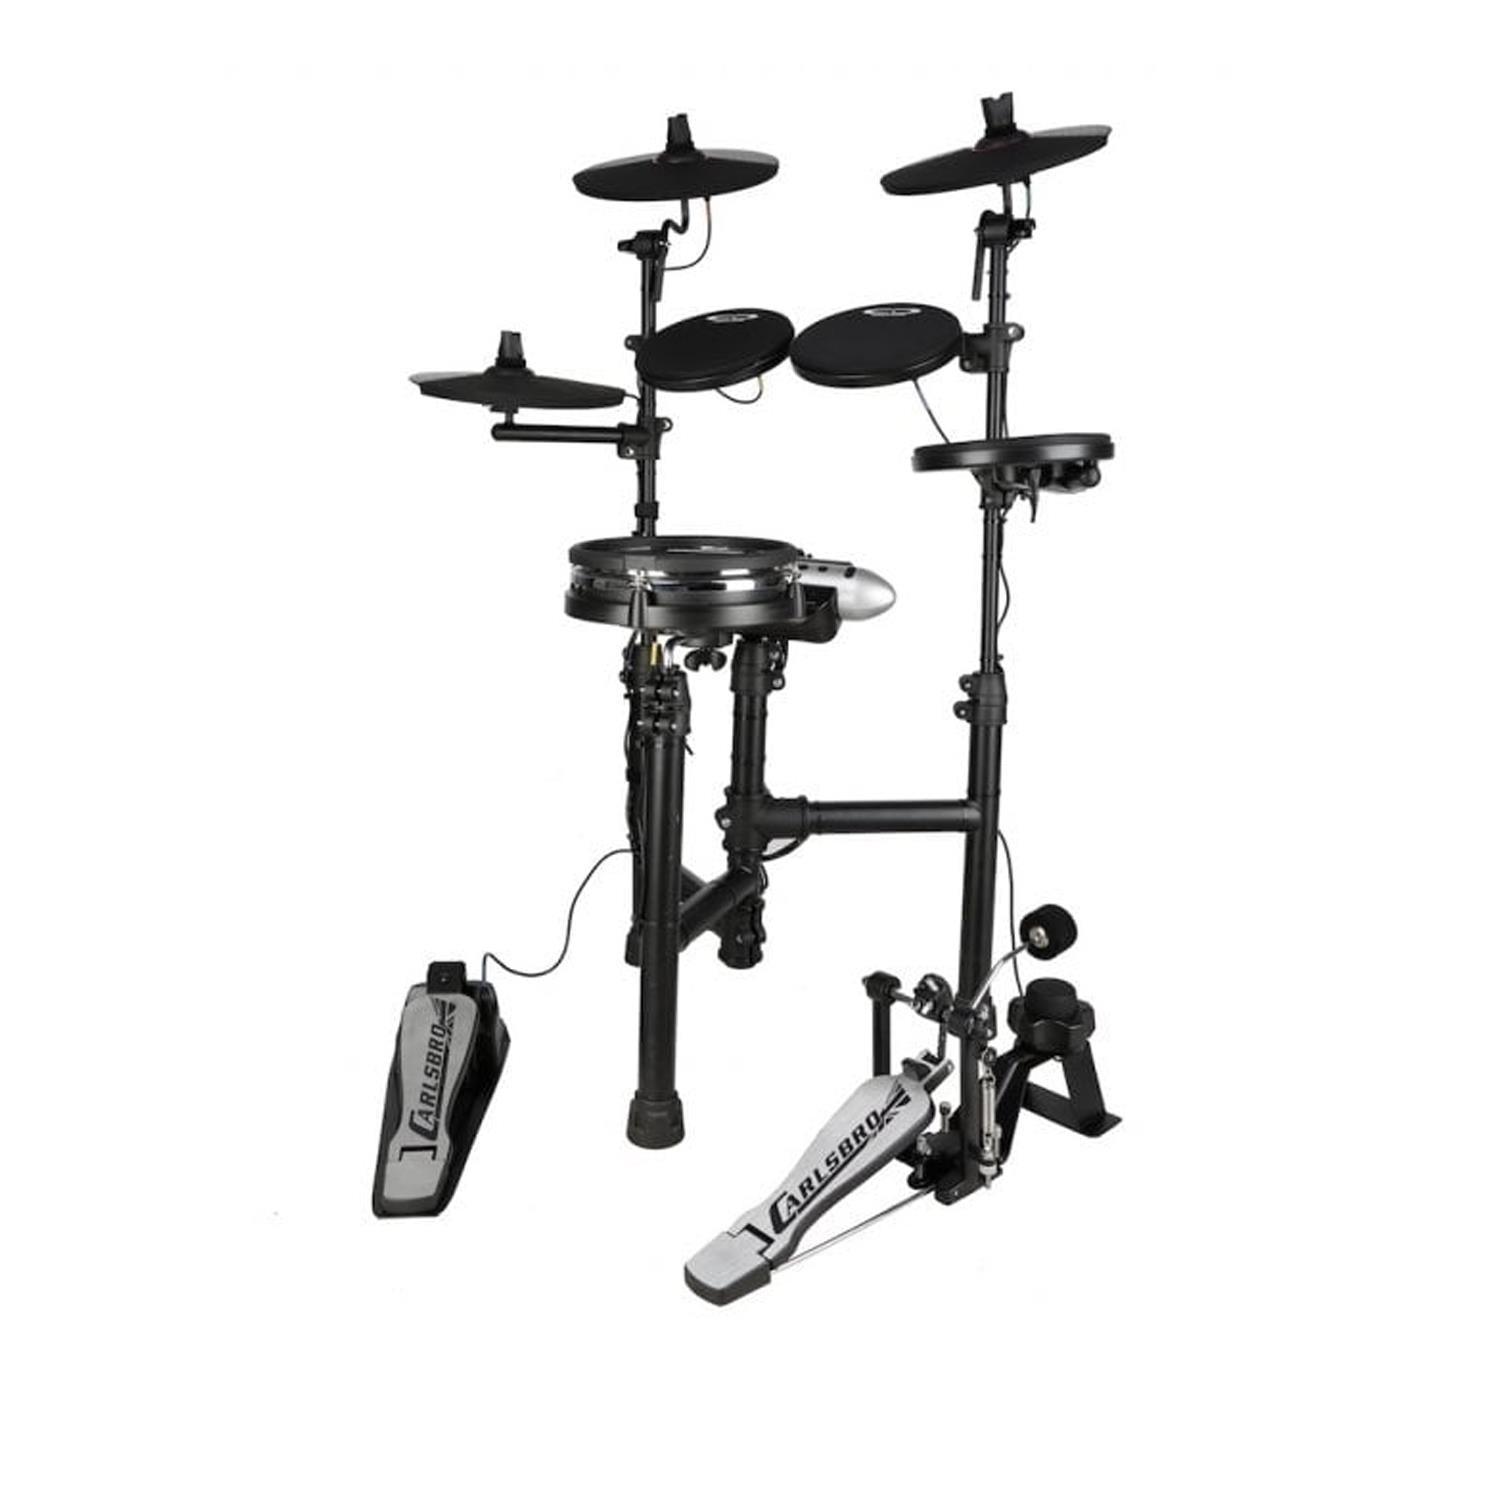 Carlsbro CSD130M Compact Electronic Drum Kit - Mesh Snare - DY Pro Audio